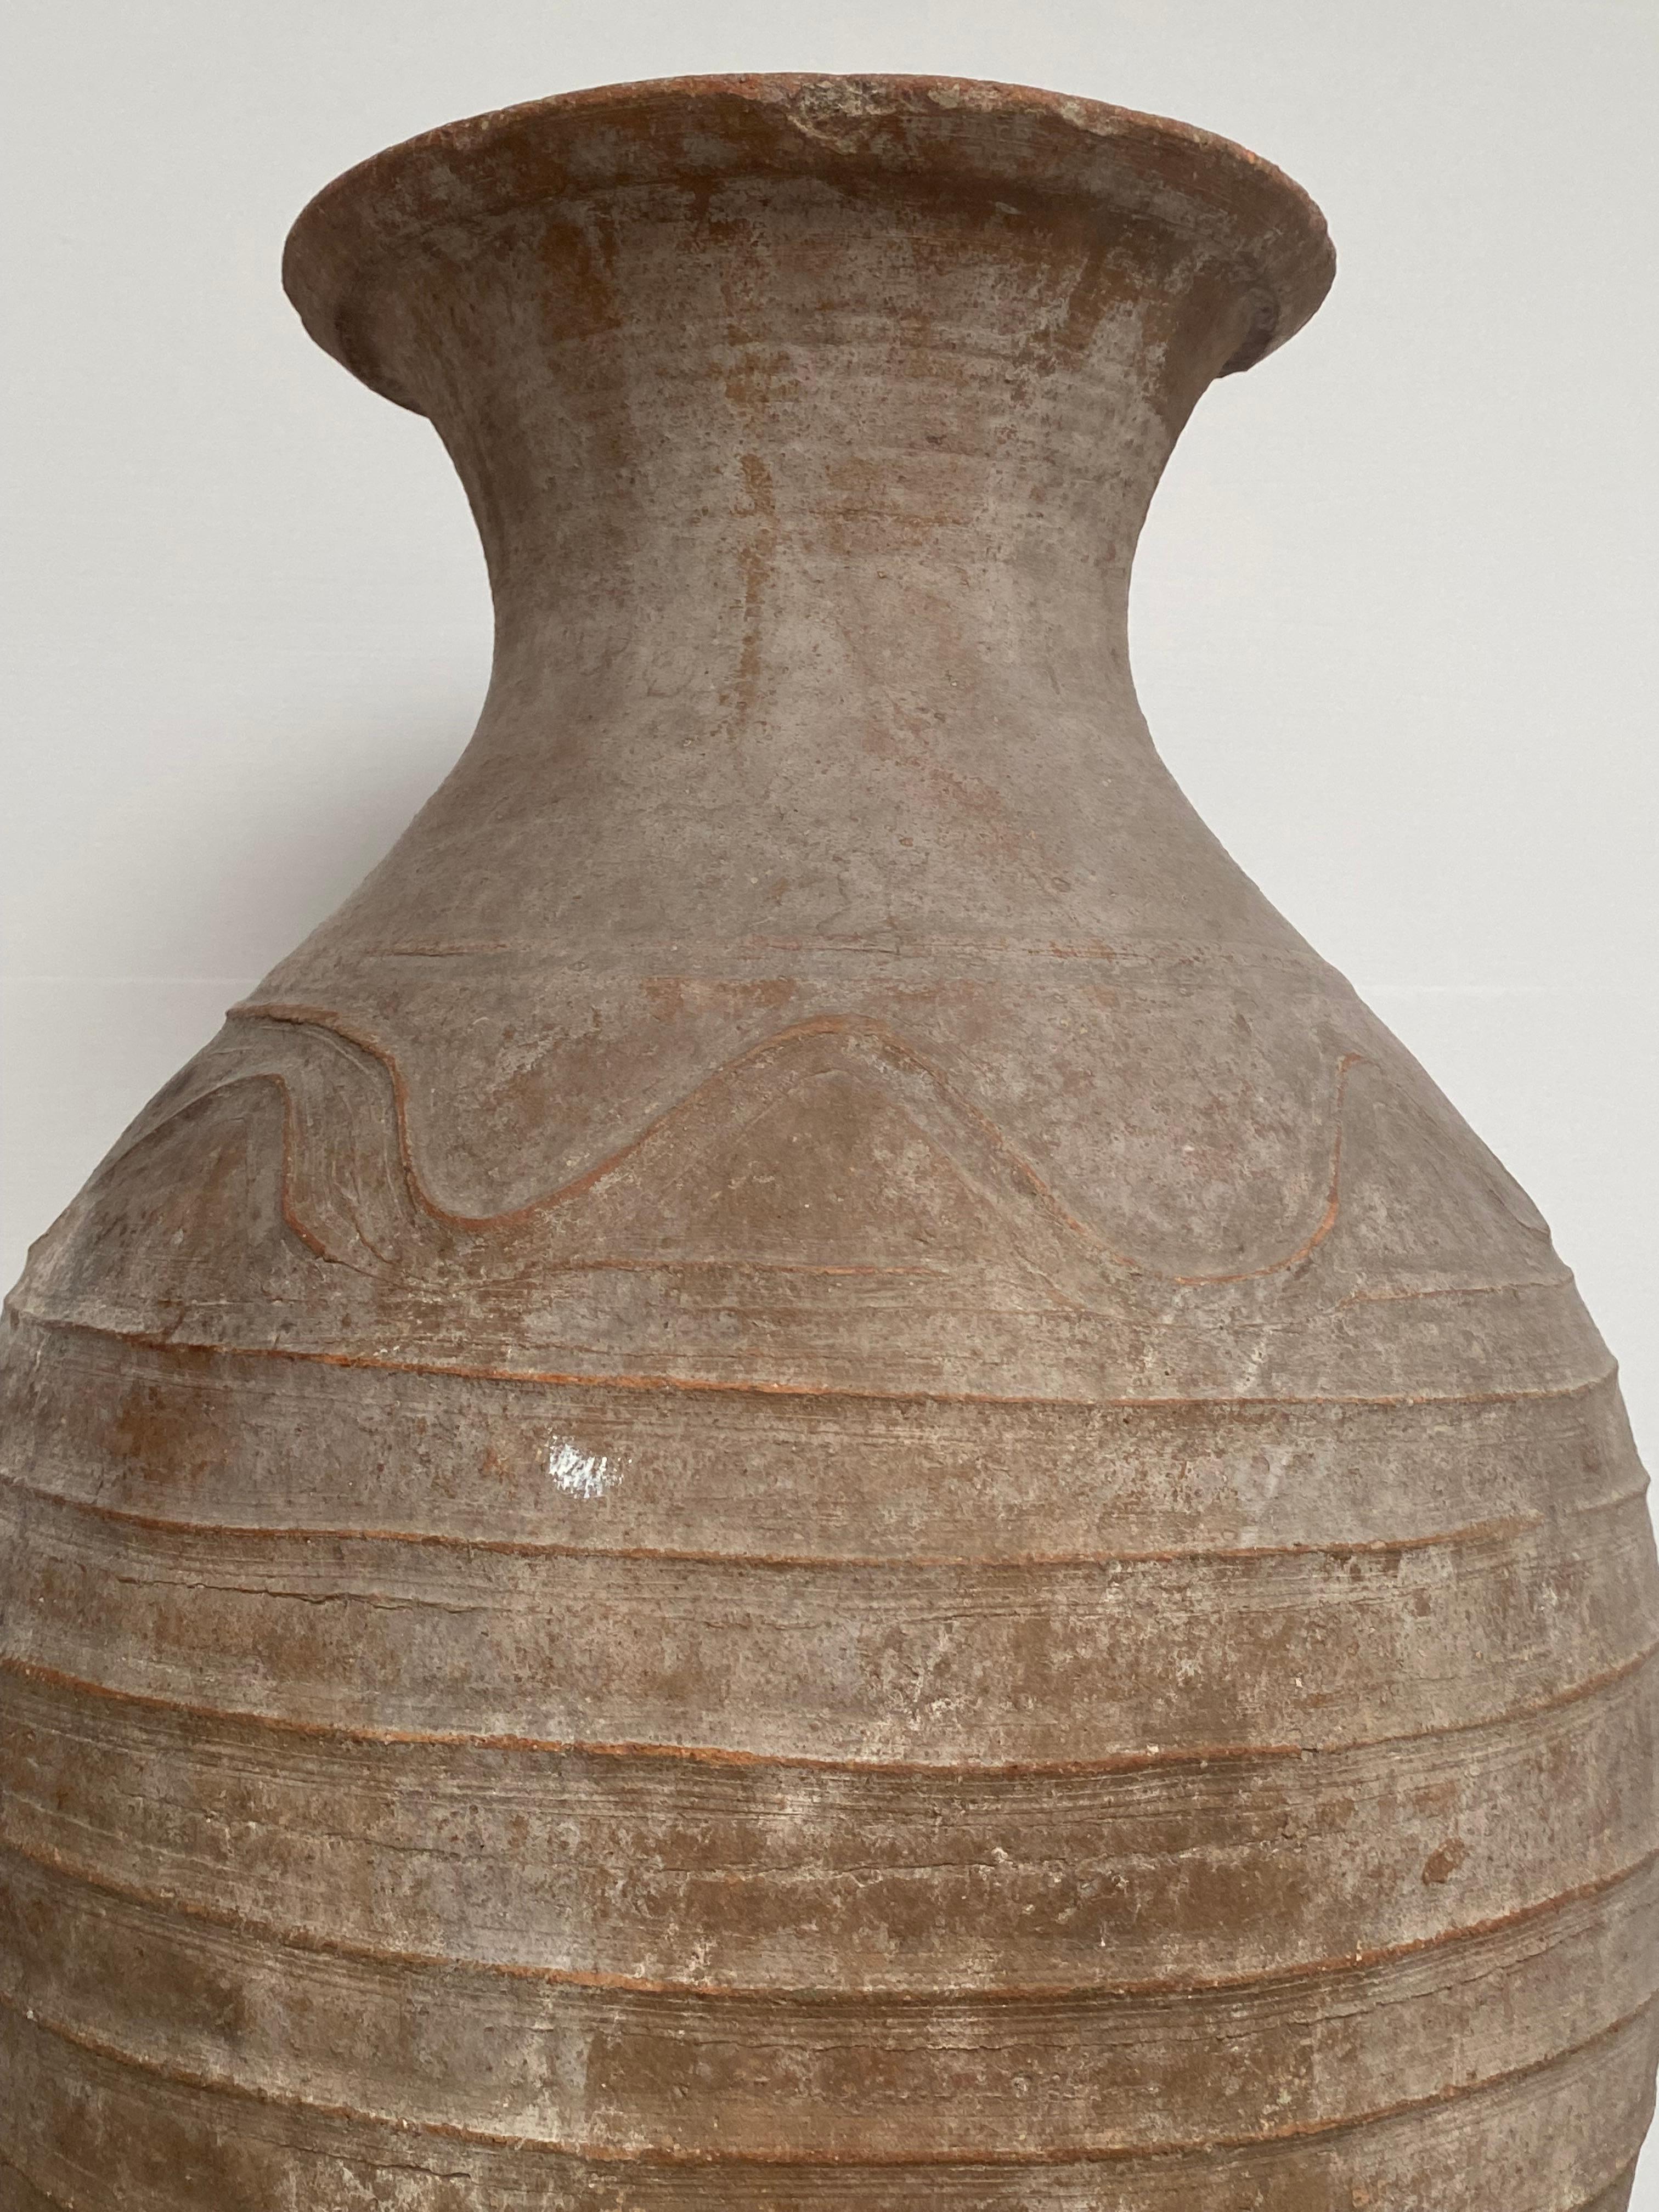 Large,antique and very elegant Terracotta Vase from Iran,1920
Good, great antique patina of the terracotta,
Decorated with simple lines and motifs,
Great shine of the different variety of the brown colors,
An antique urn full of charm and